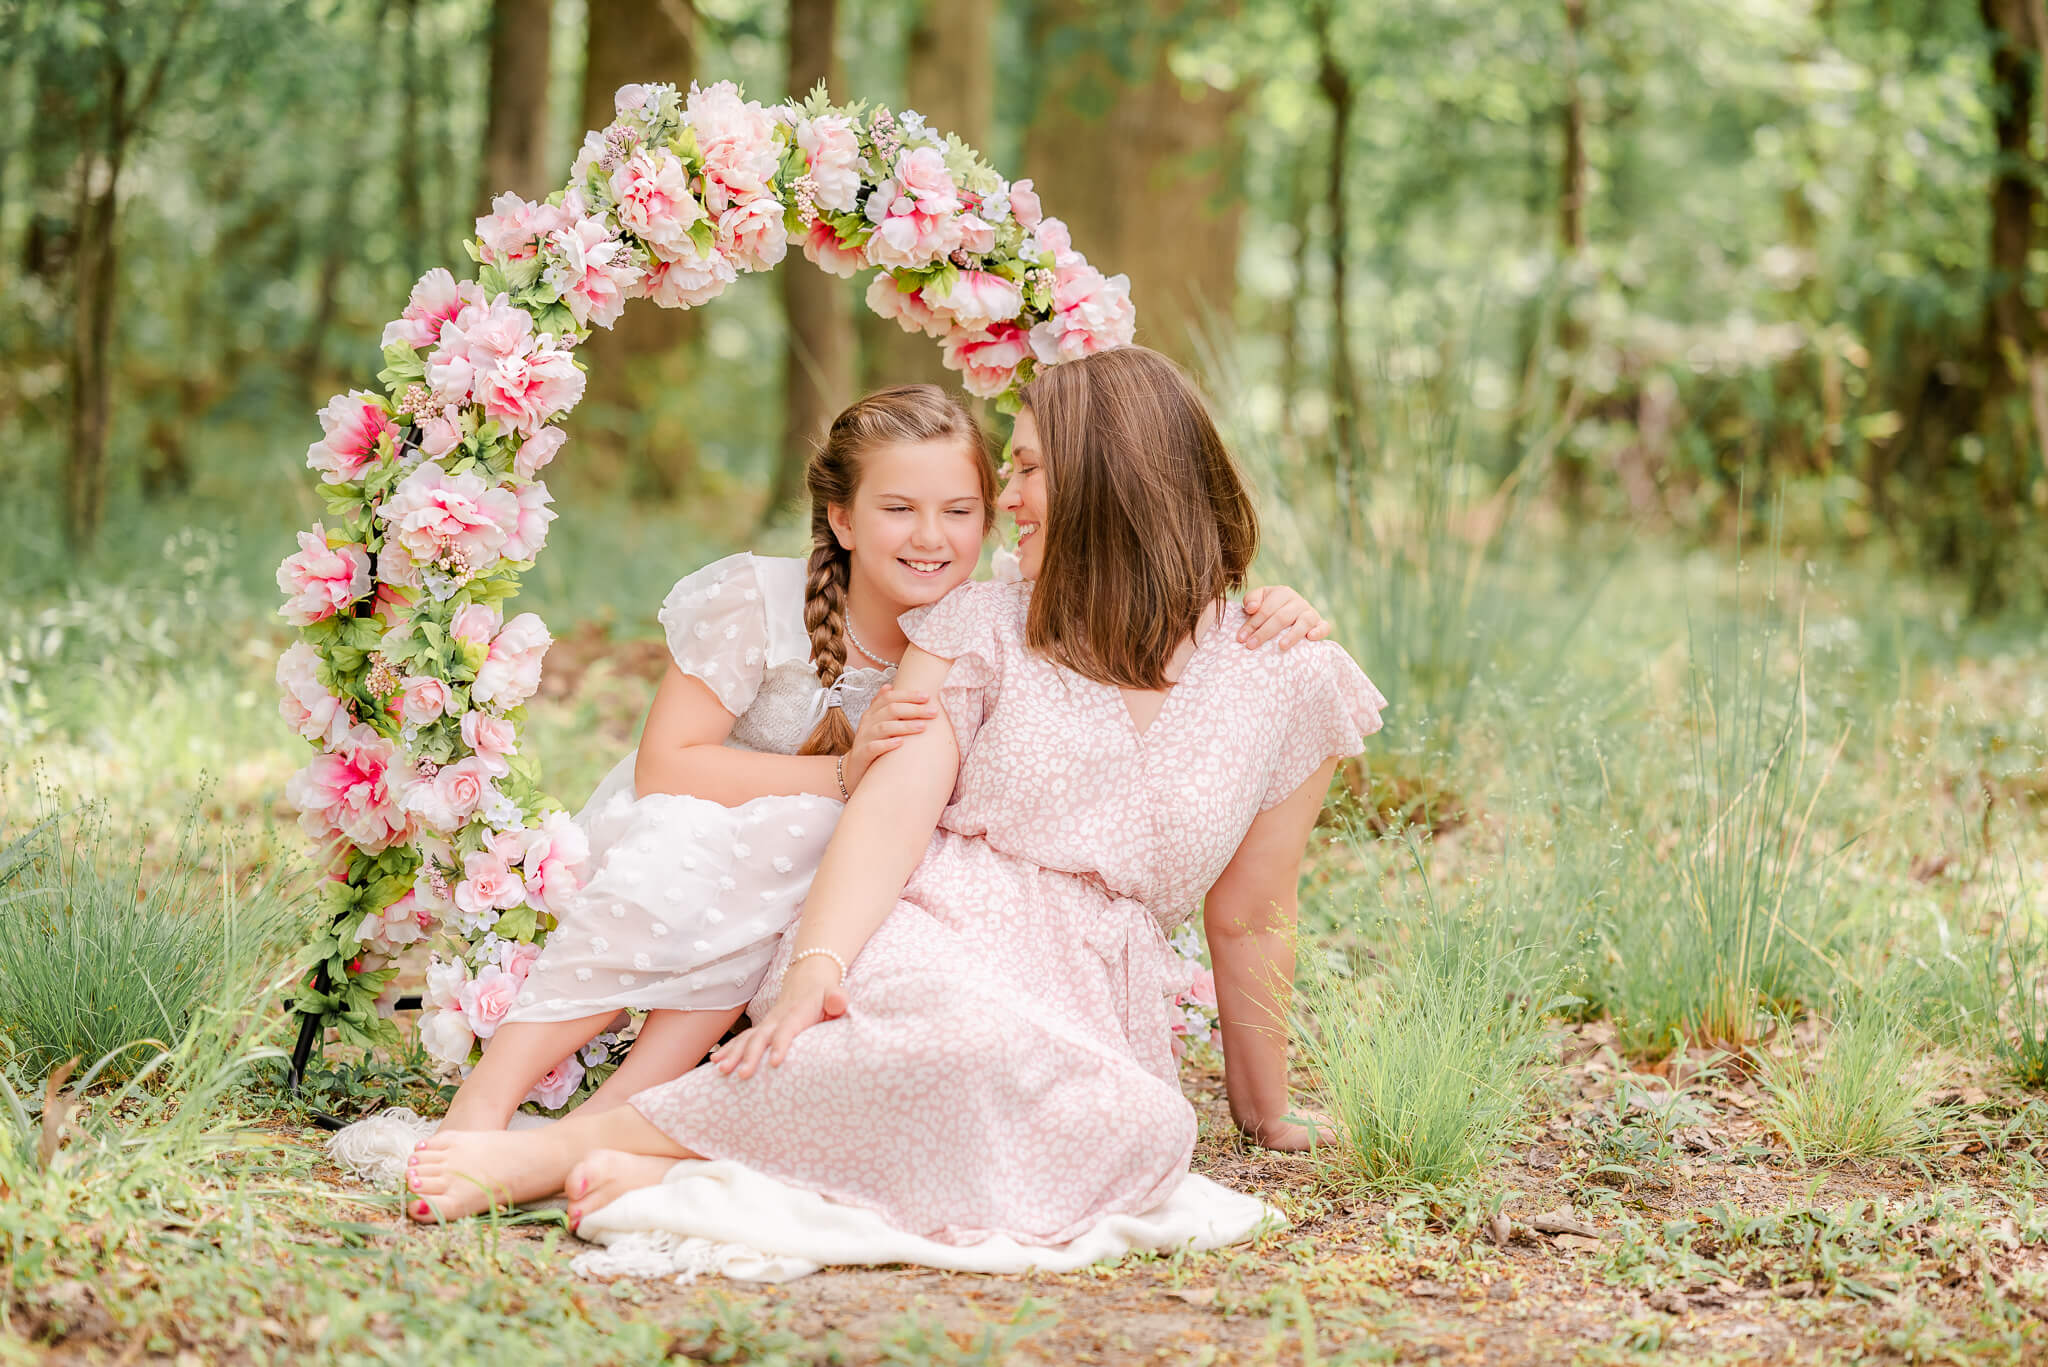 A mother and daughter snuggle close while sitting in front of a floral hoop. The mother wears a pink dress and the girl is in white.